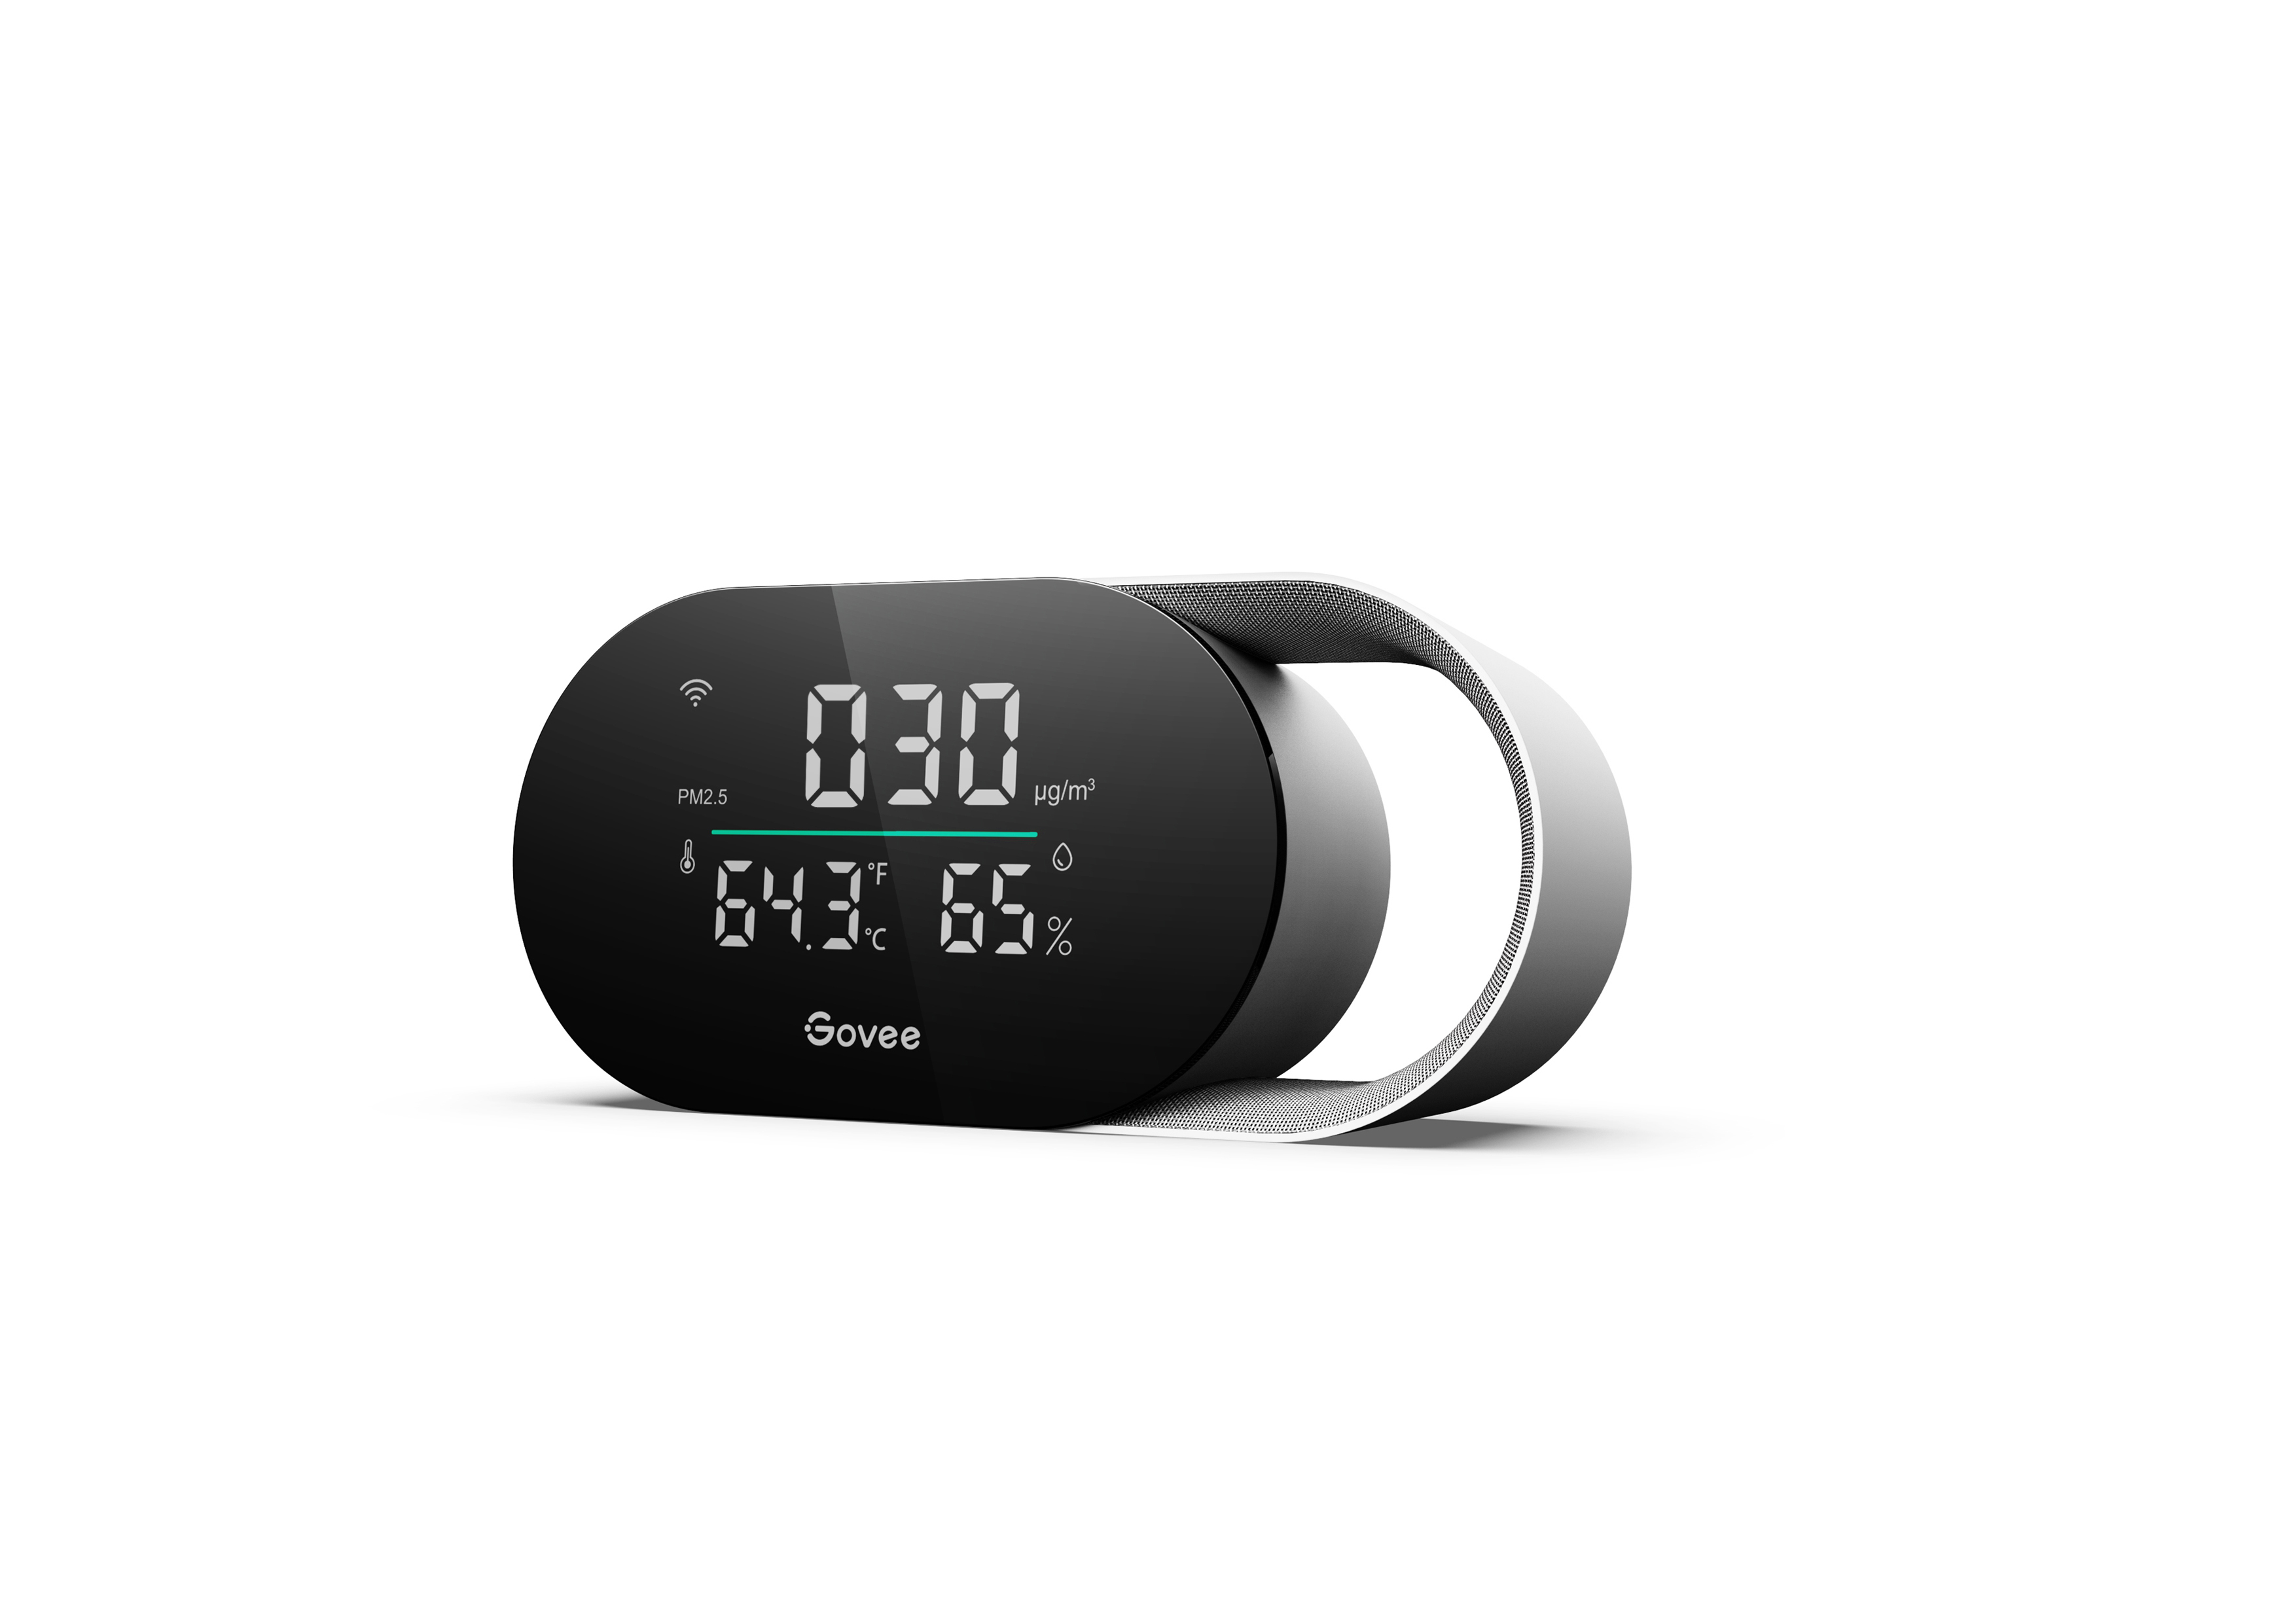 Smart air quality monitor